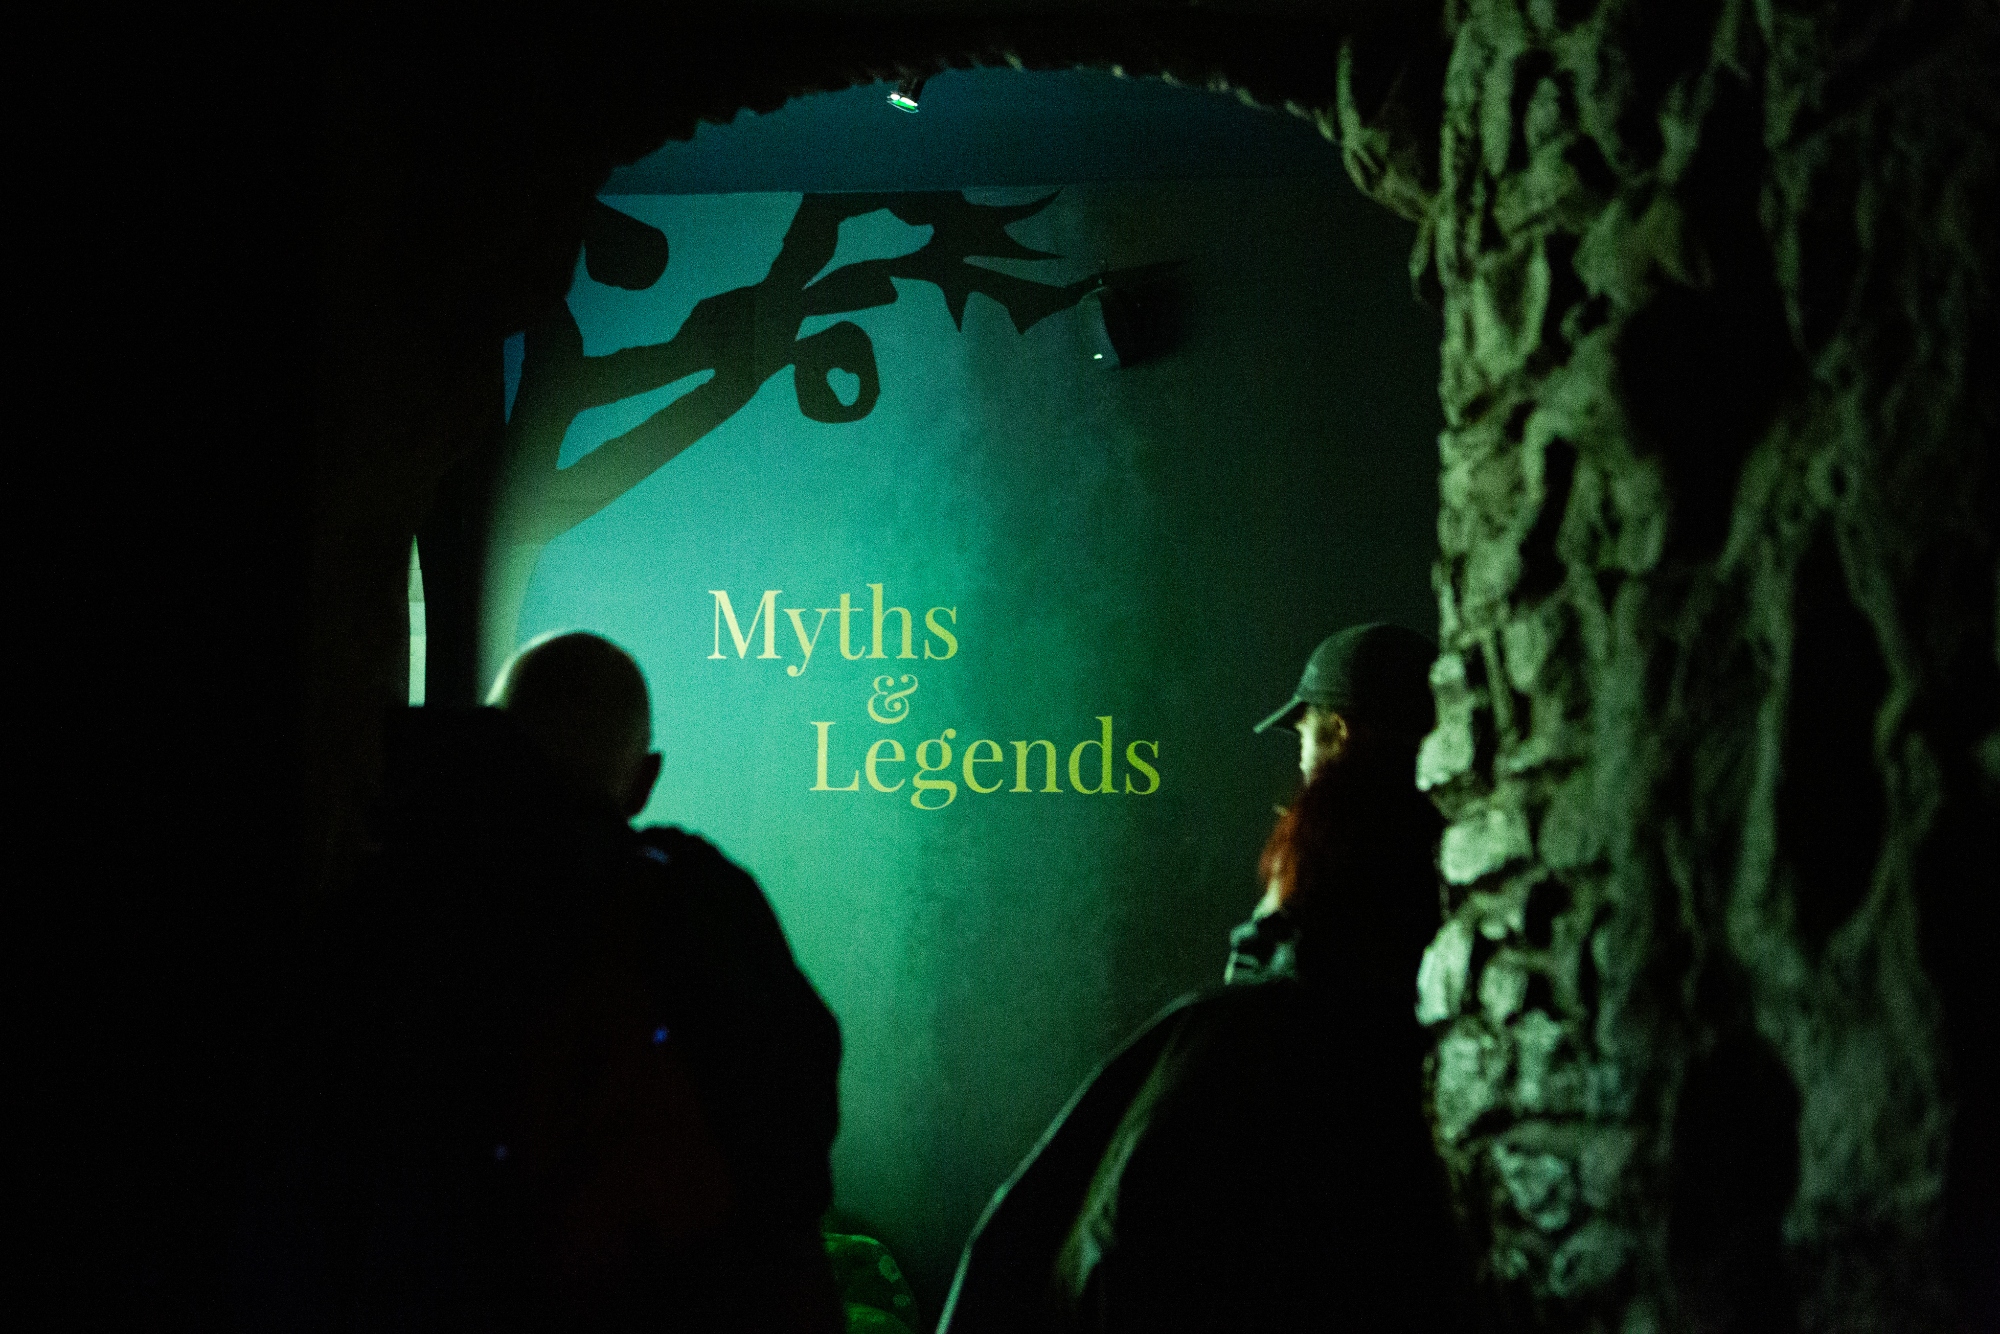 Myths and Legends at Loch Ness